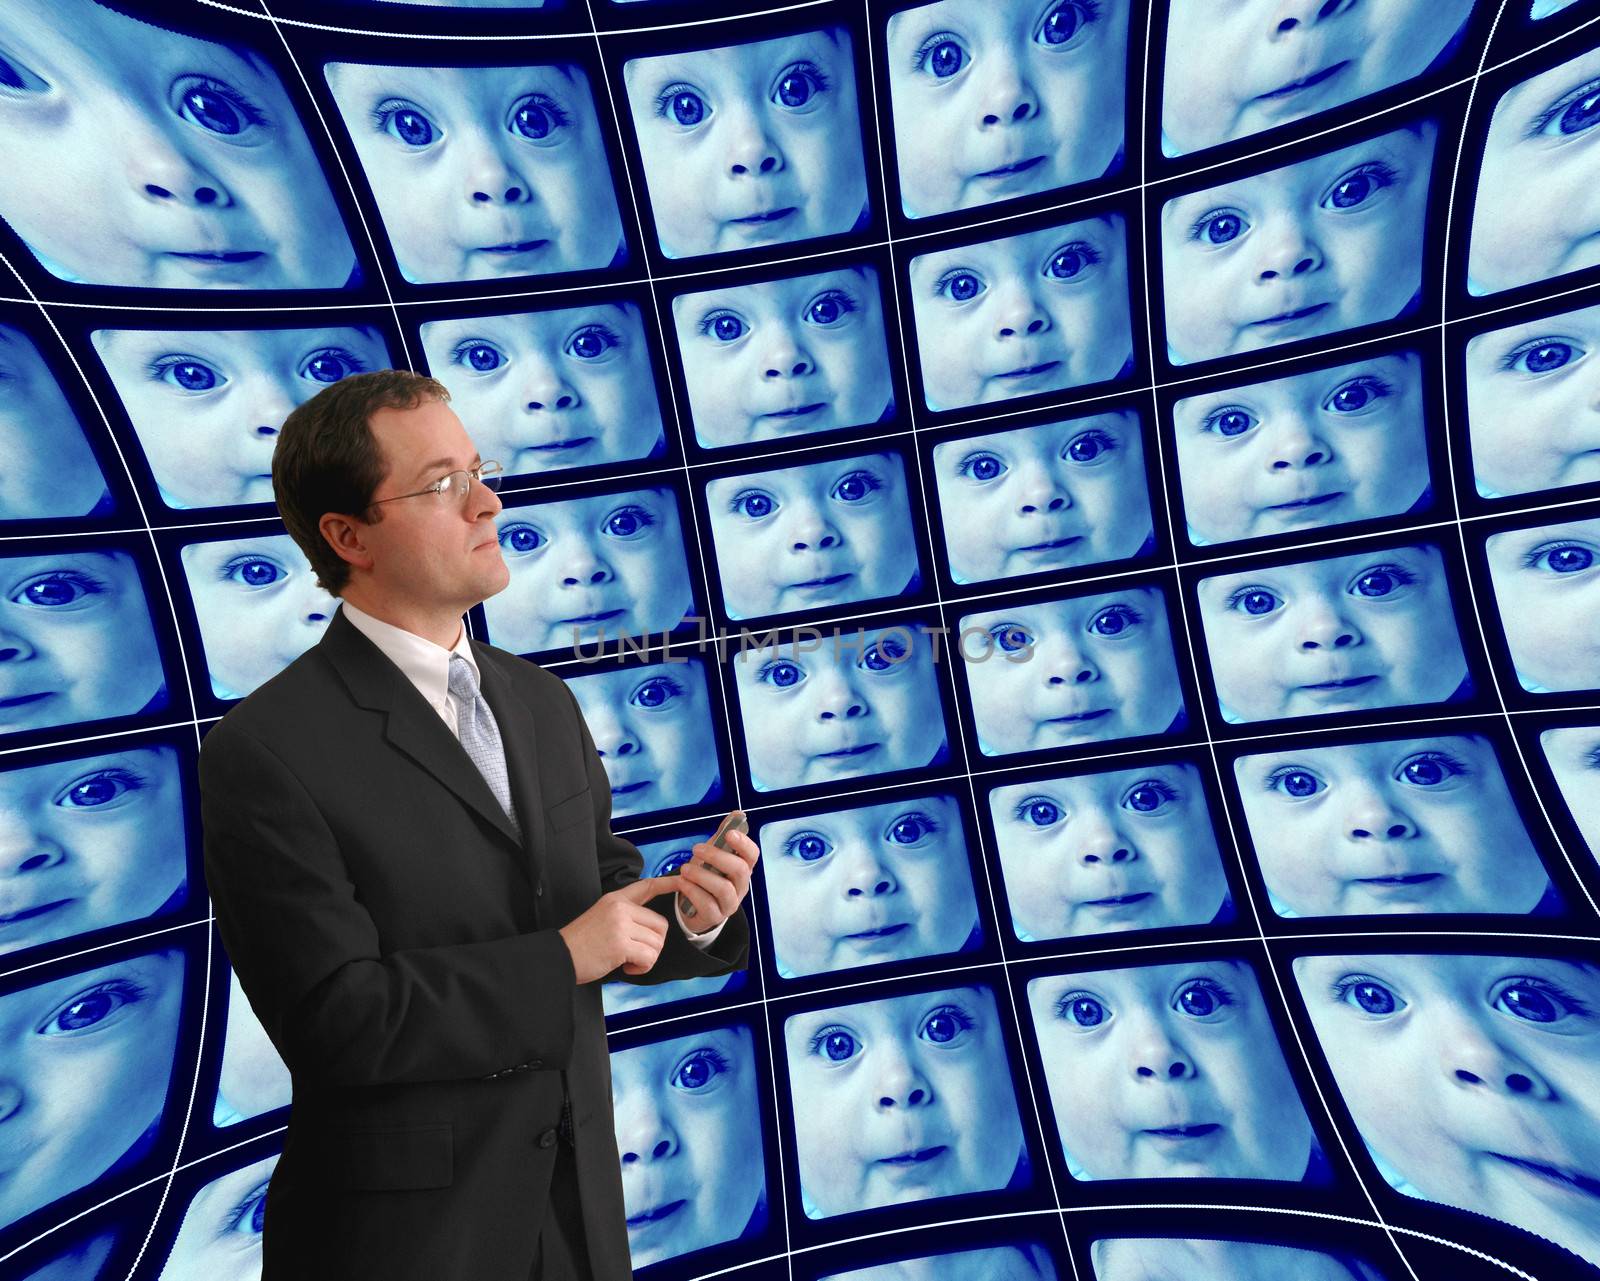 Man in suit monitoring babies on distorted video screens by Balefire9